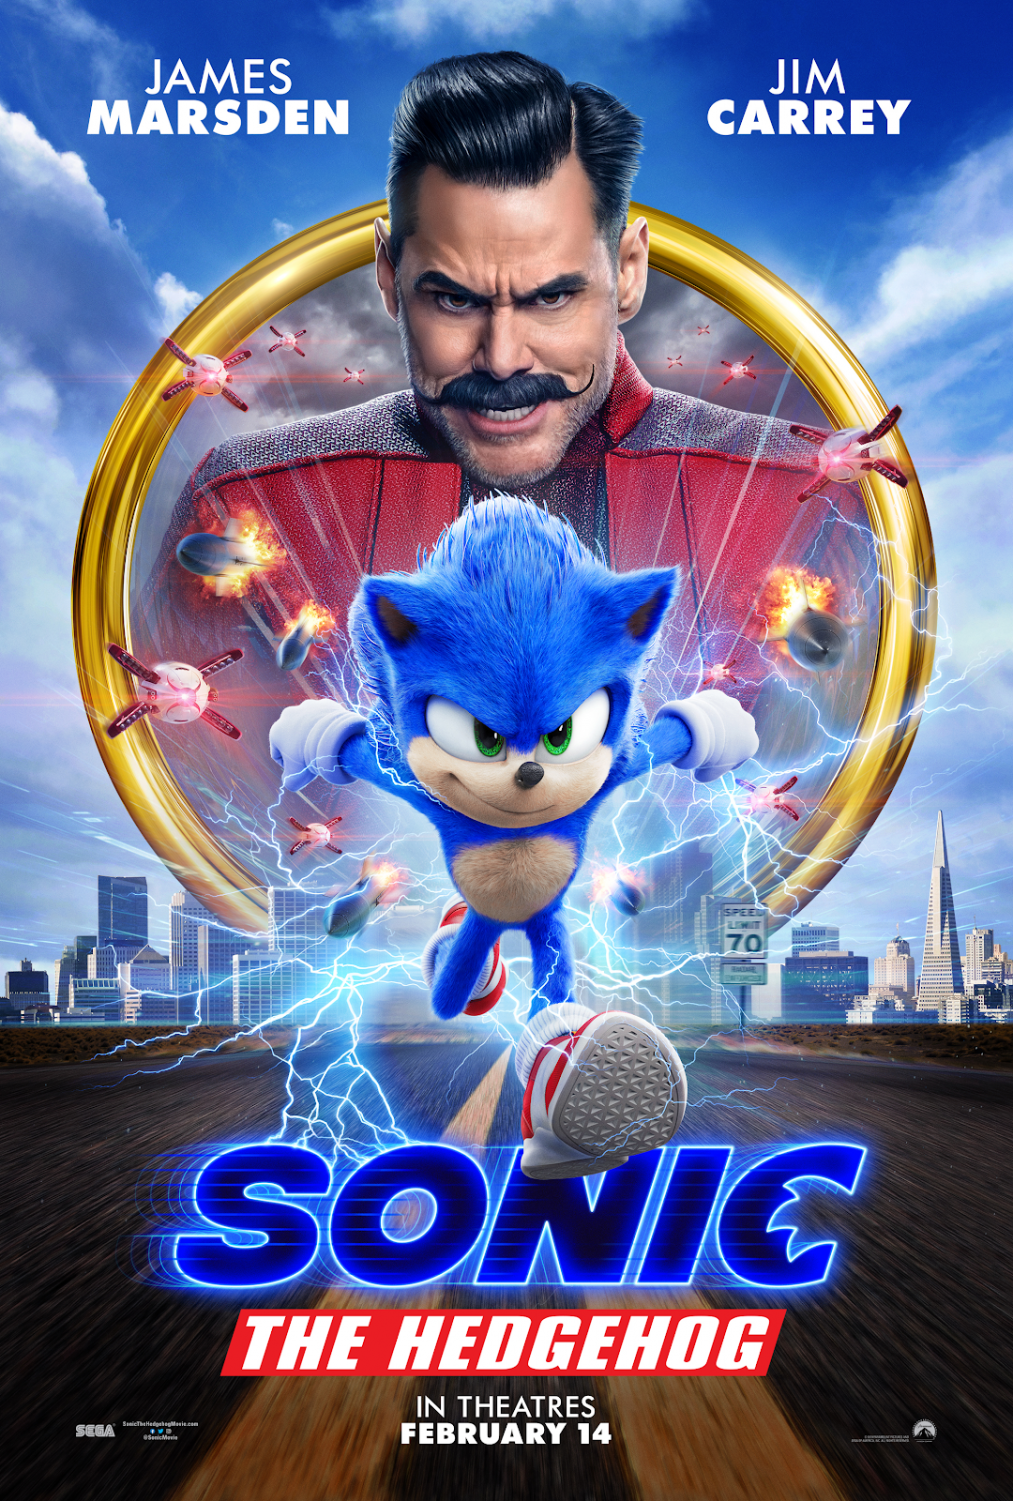 Sonic The Hedgeblog — Sonic Remixed: The Edge Of Tomorrow' by